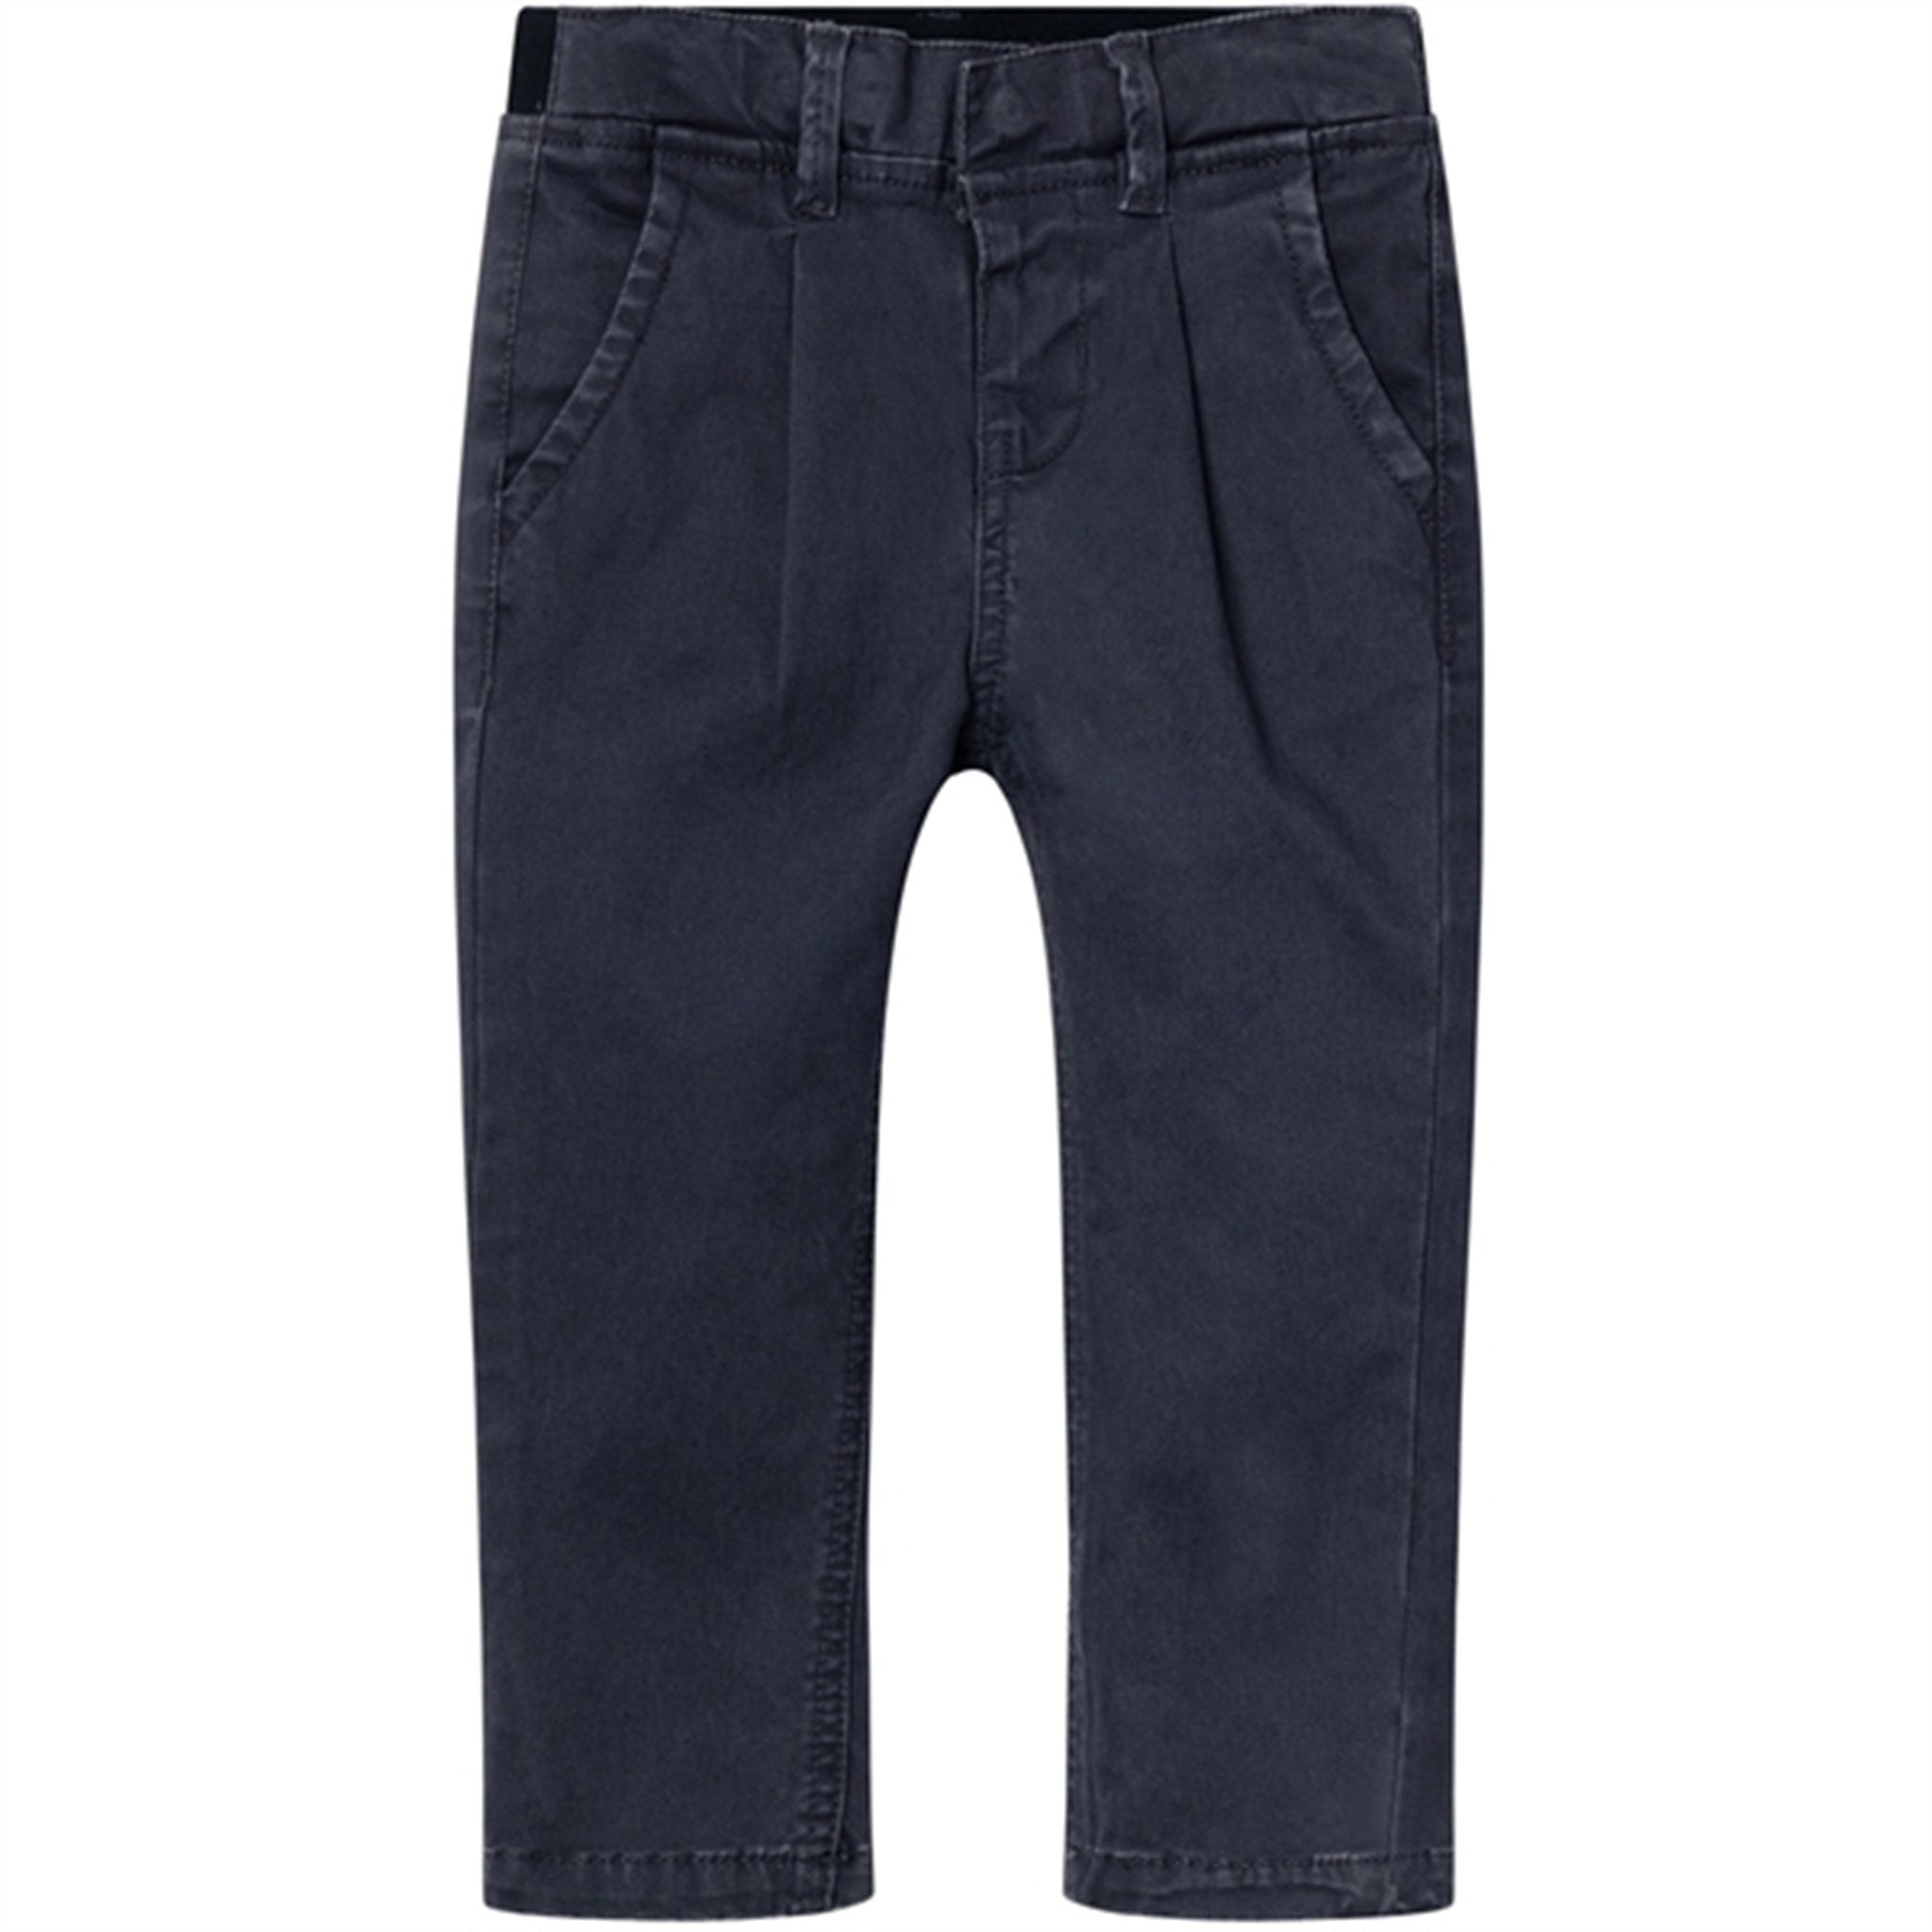 Name it India Ink Ryan Tapered Twill Chino Pants